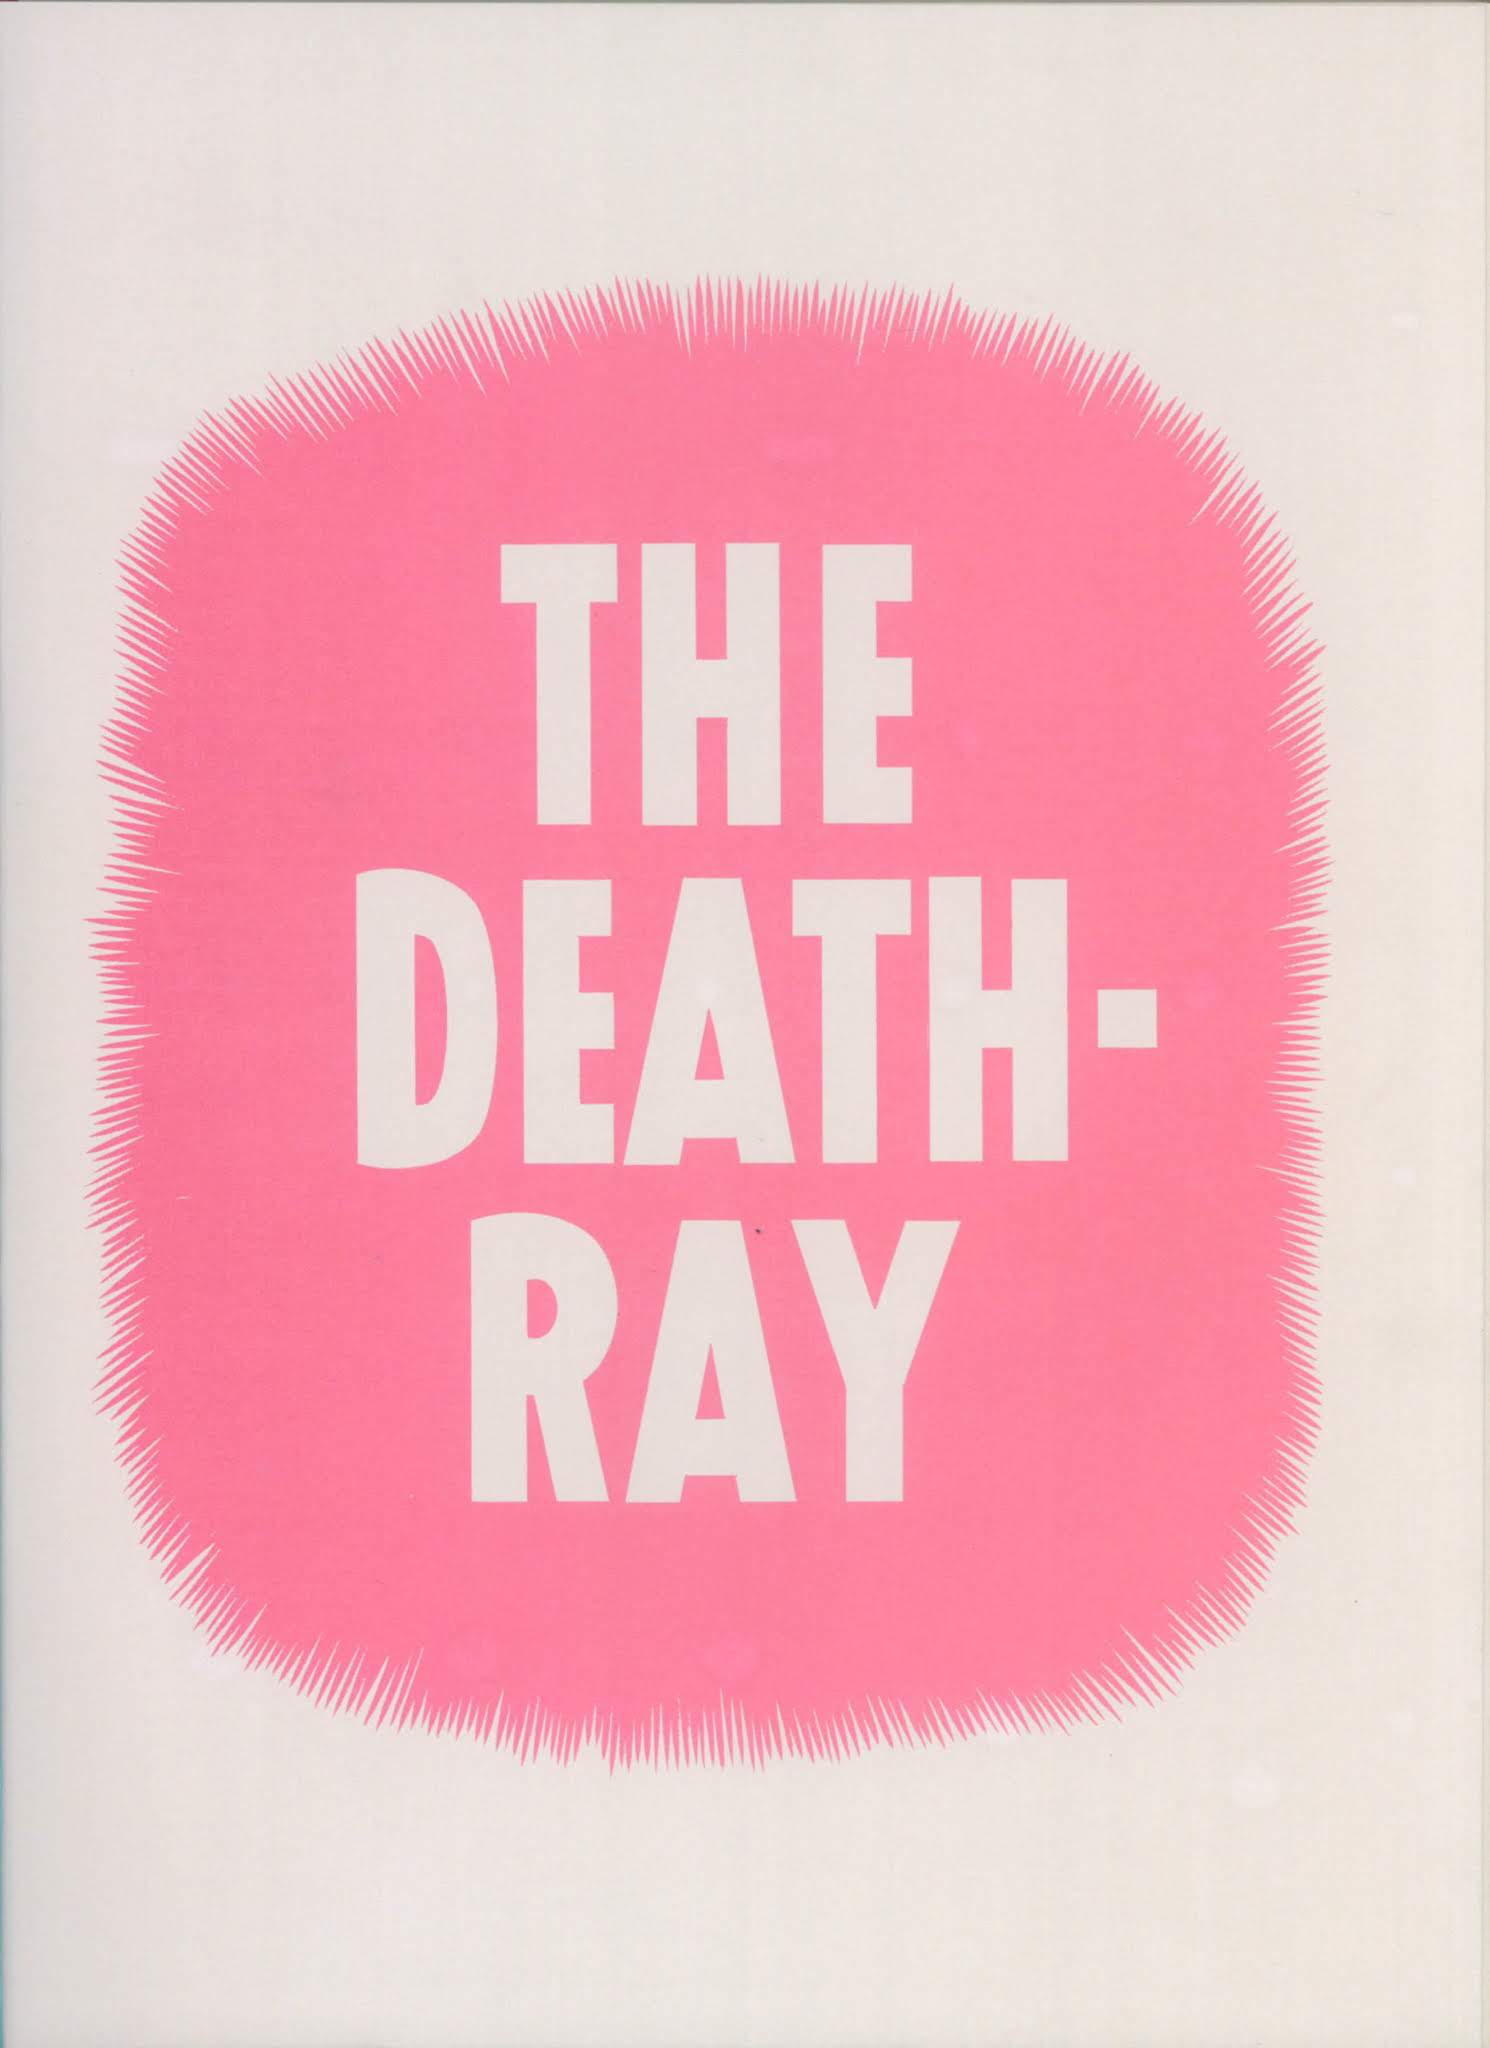 Read online The Death-Ray comic -  Issue # Full - 5